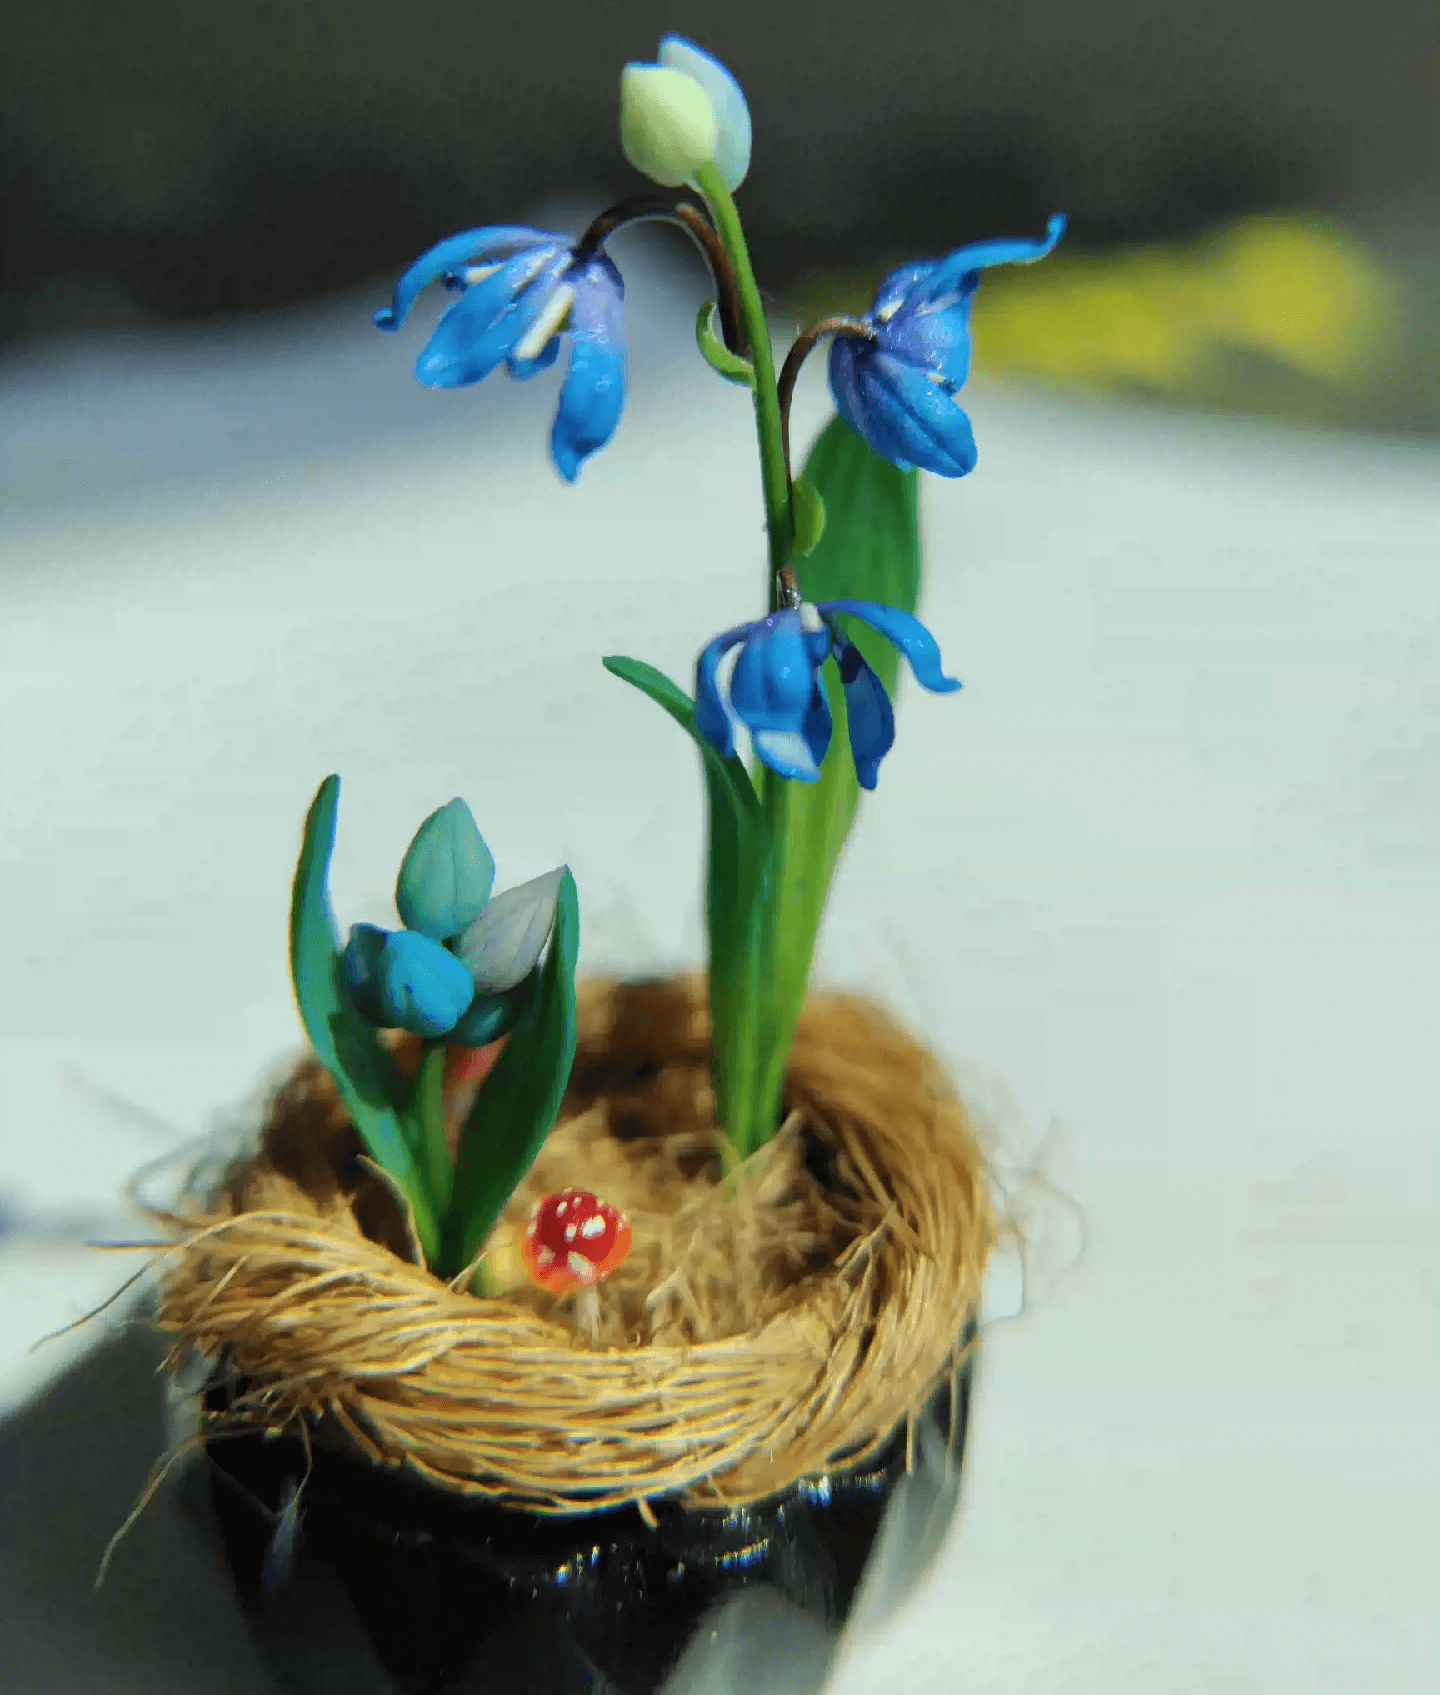 Siberian Squill (Scilla siberica) produces multiple flowers per stem, in the most beautiful deep blue color. Mushroom, Bird's eggs and Siberian Squill (Scilla siberica) in Gypsum pot.  Material: Handmade from Clay